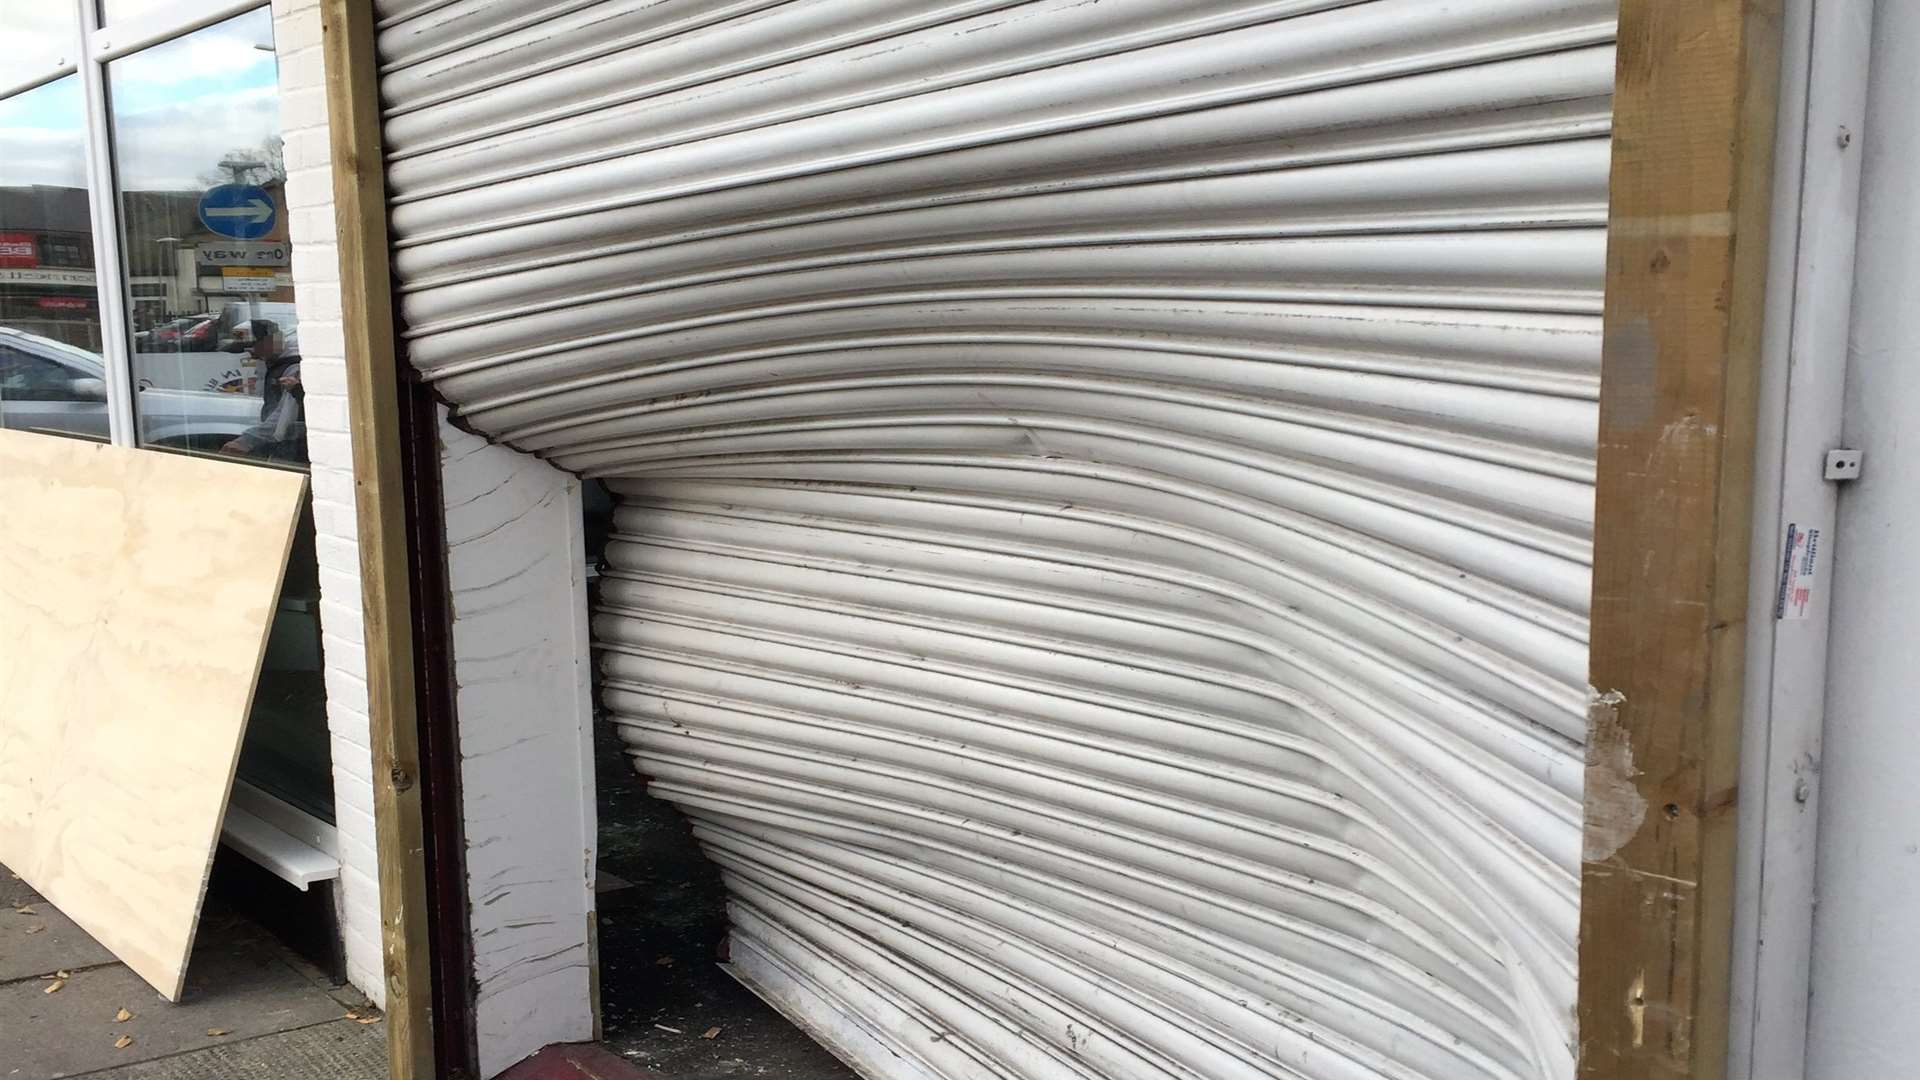 The damage the car caused to the shutters. Pic: Kent Police